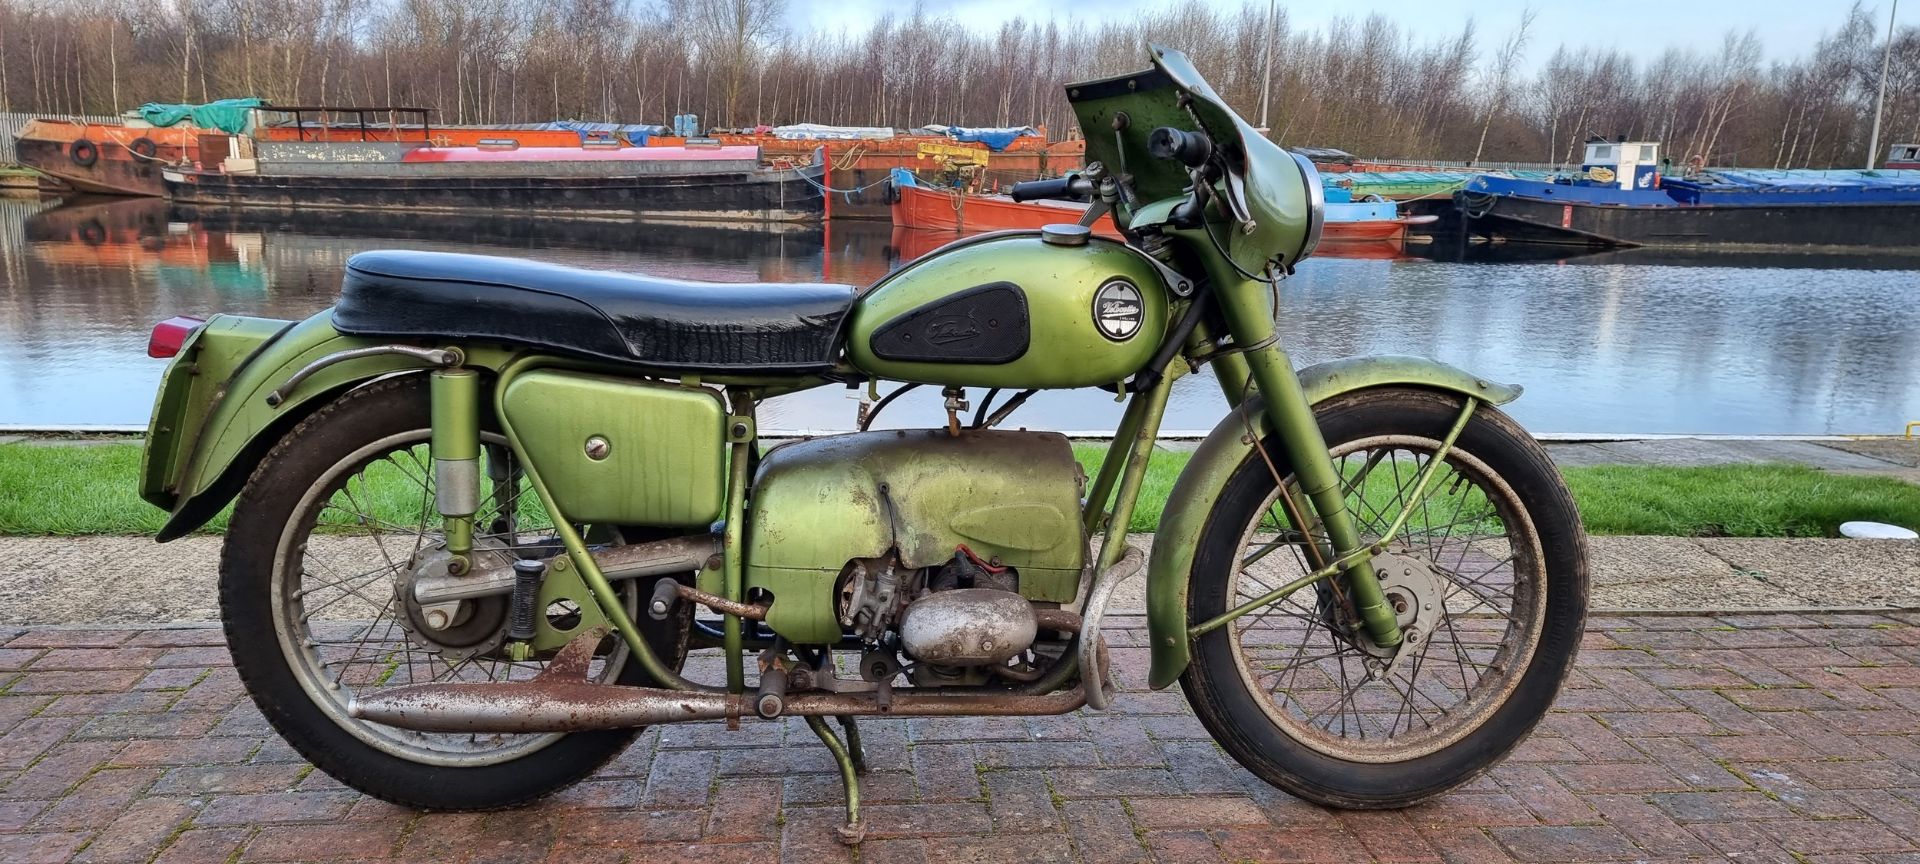 1958 Velocette Valiant 192cc. Registration number WRW 901 (see text). Frame number unknown. Engine